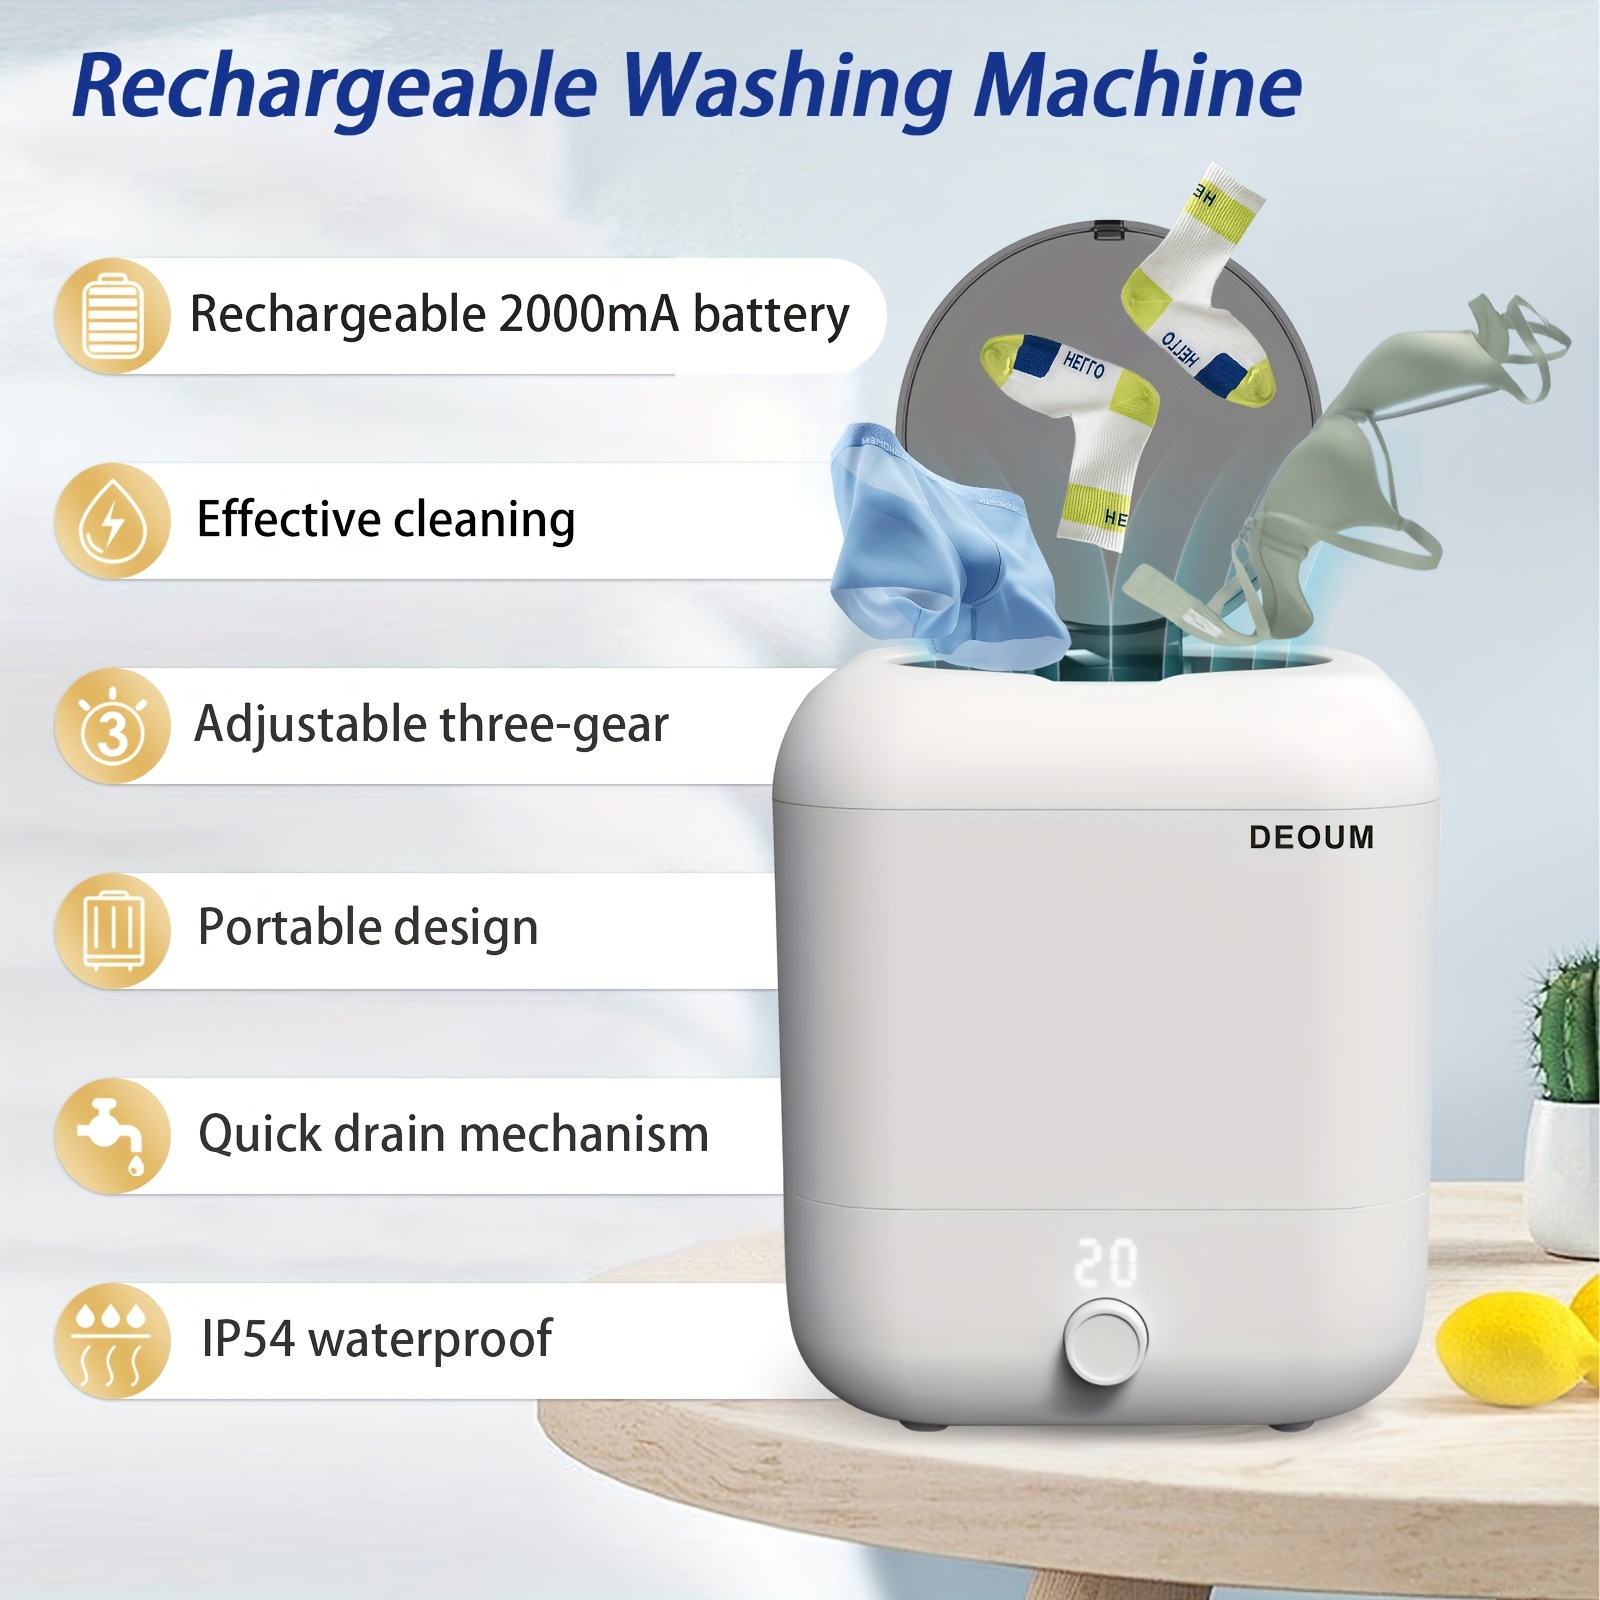 8L Portable Mini Washing Machine - Fully Automatic, Multi-Functional,  Ultra-Quiet, Low-Consumption For Home, Business, Travel & More!